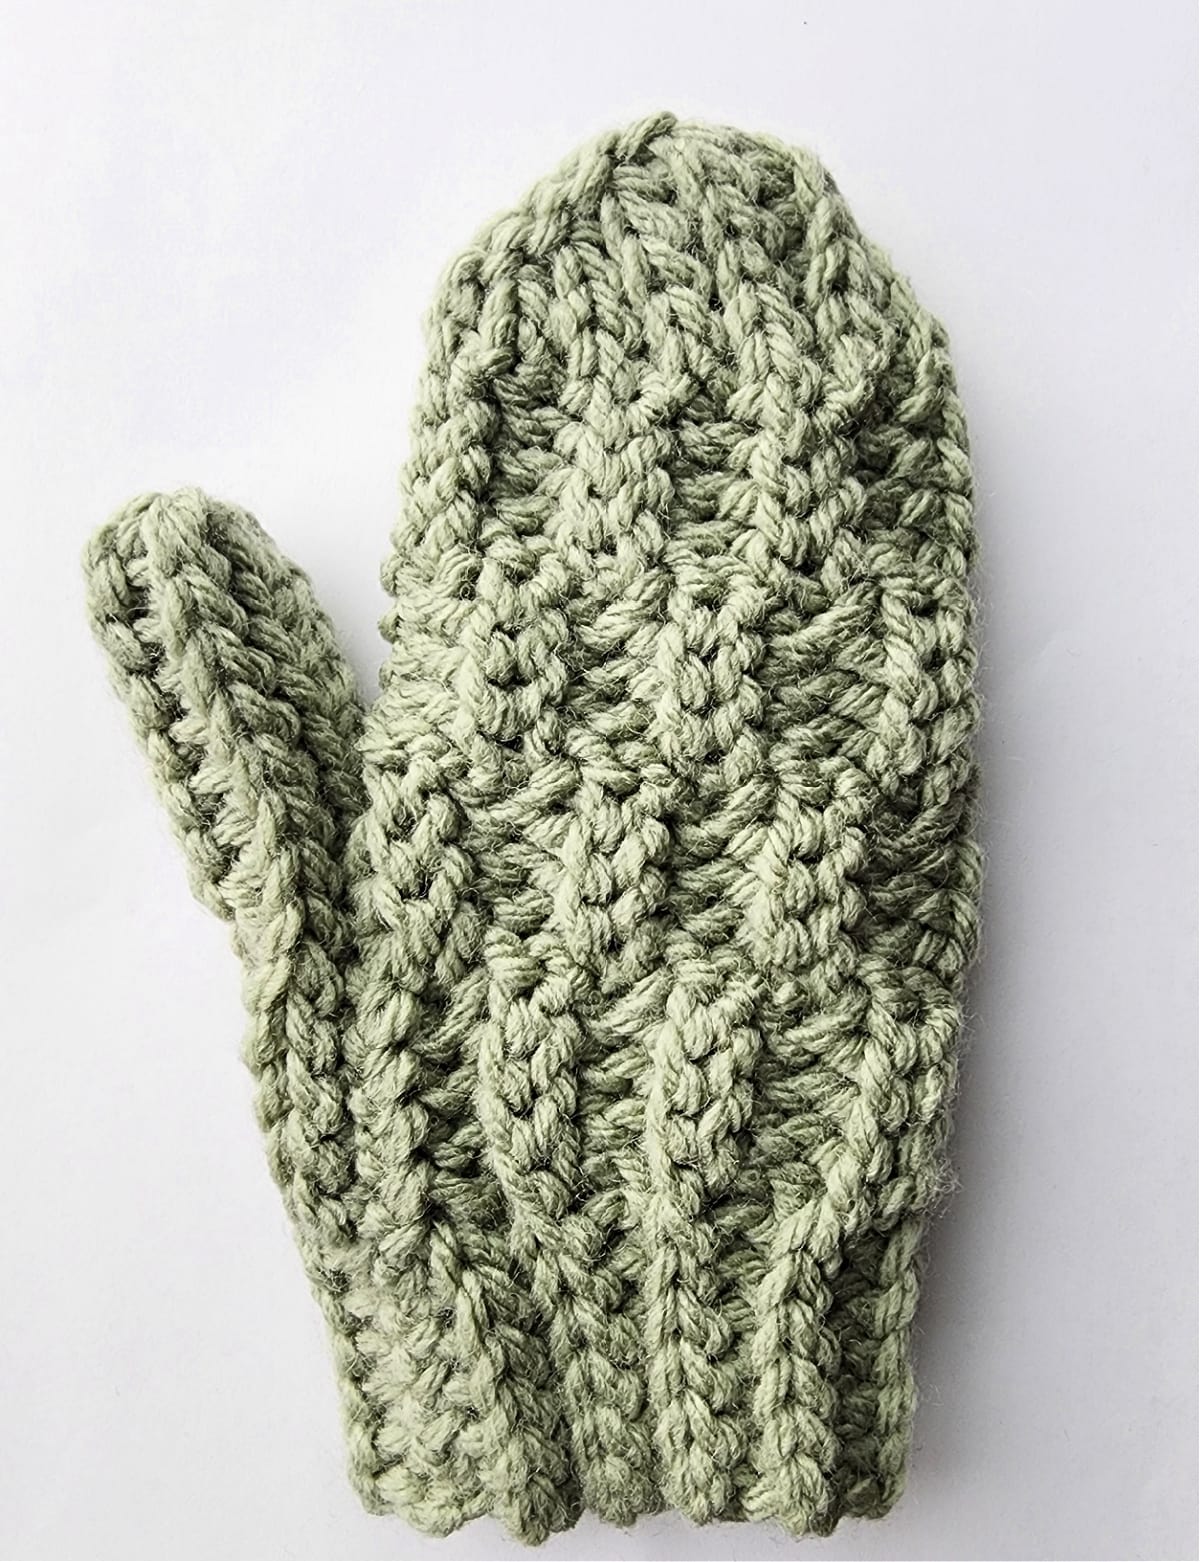 chunky crochet mitten palm side down after seaming